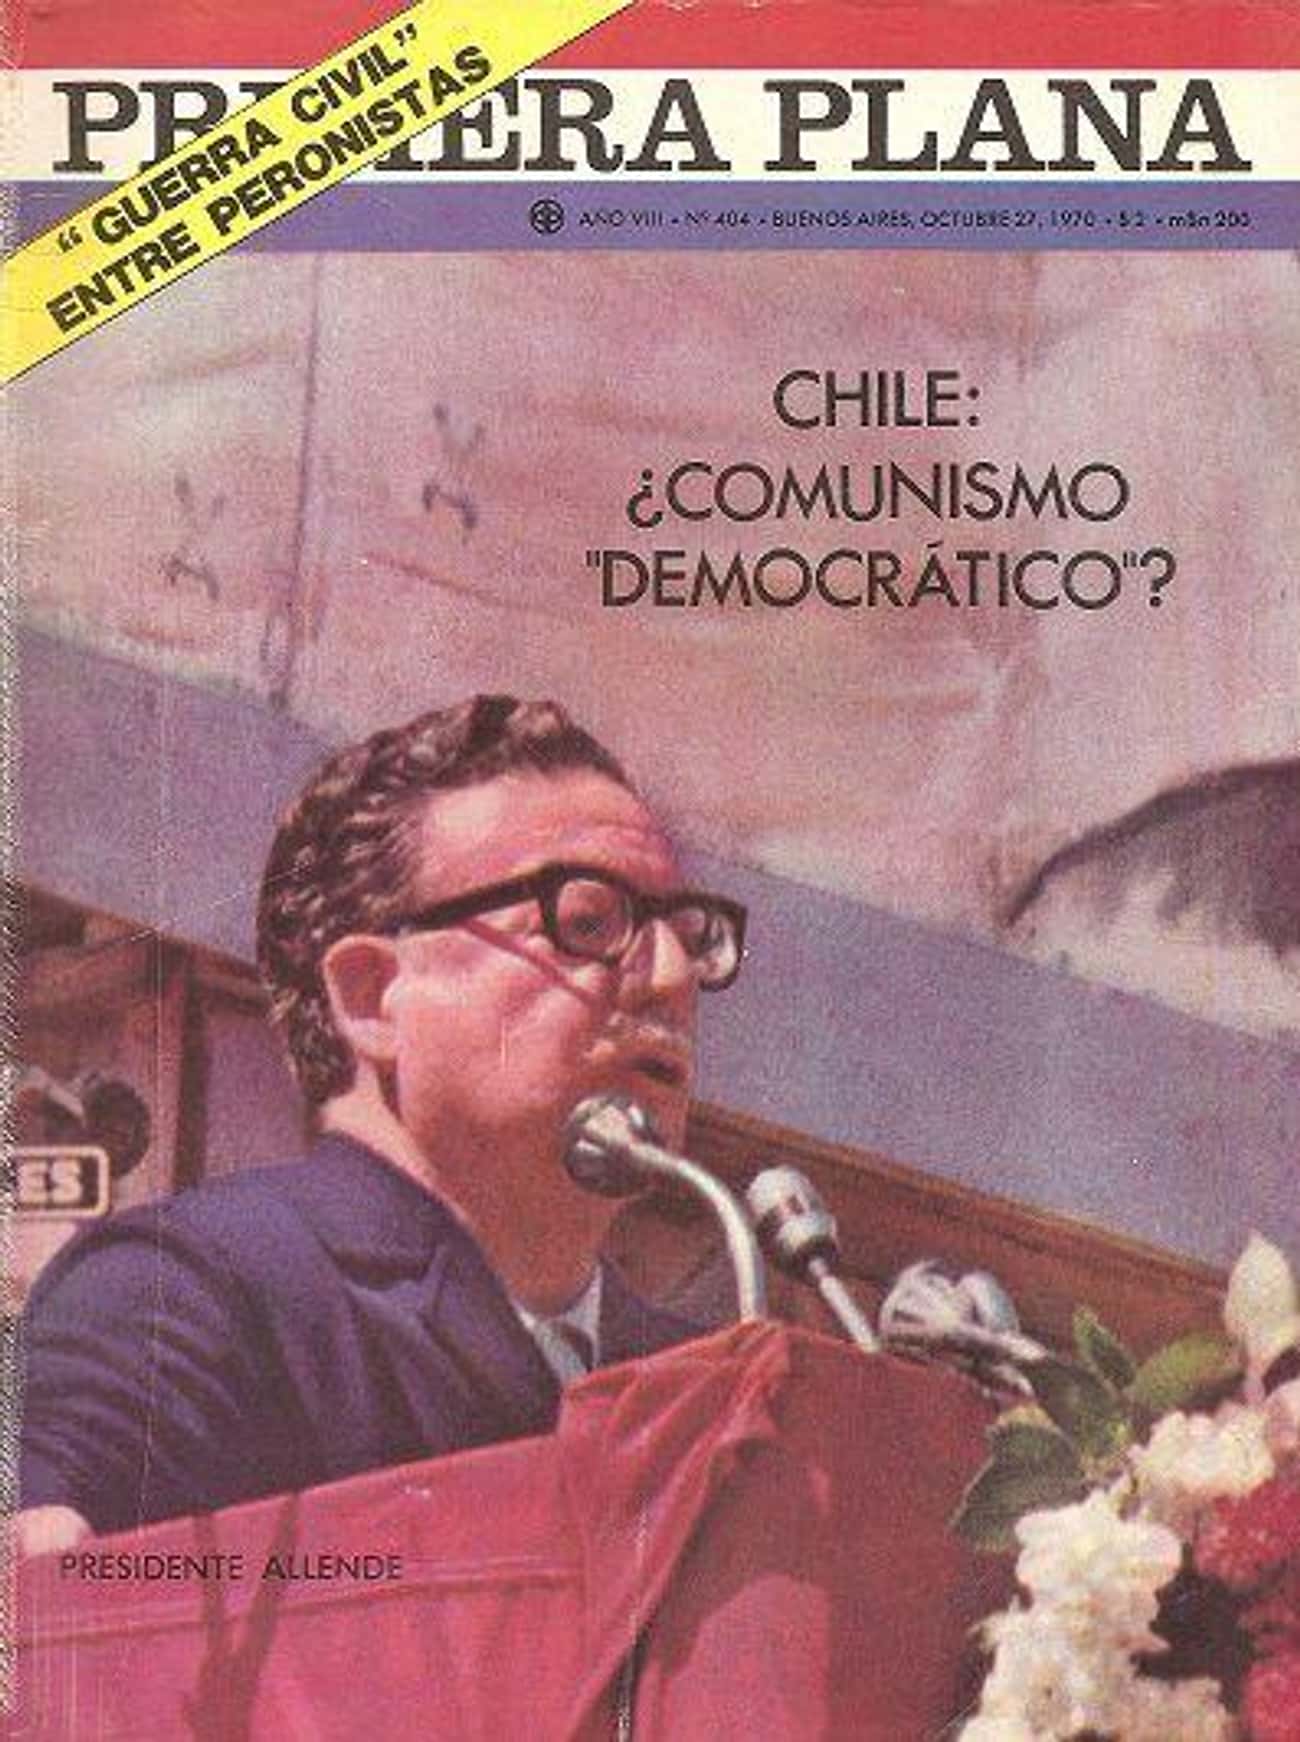 Salvador Allende's Policy Was To Bring About "The Chilean Way To Socialism"